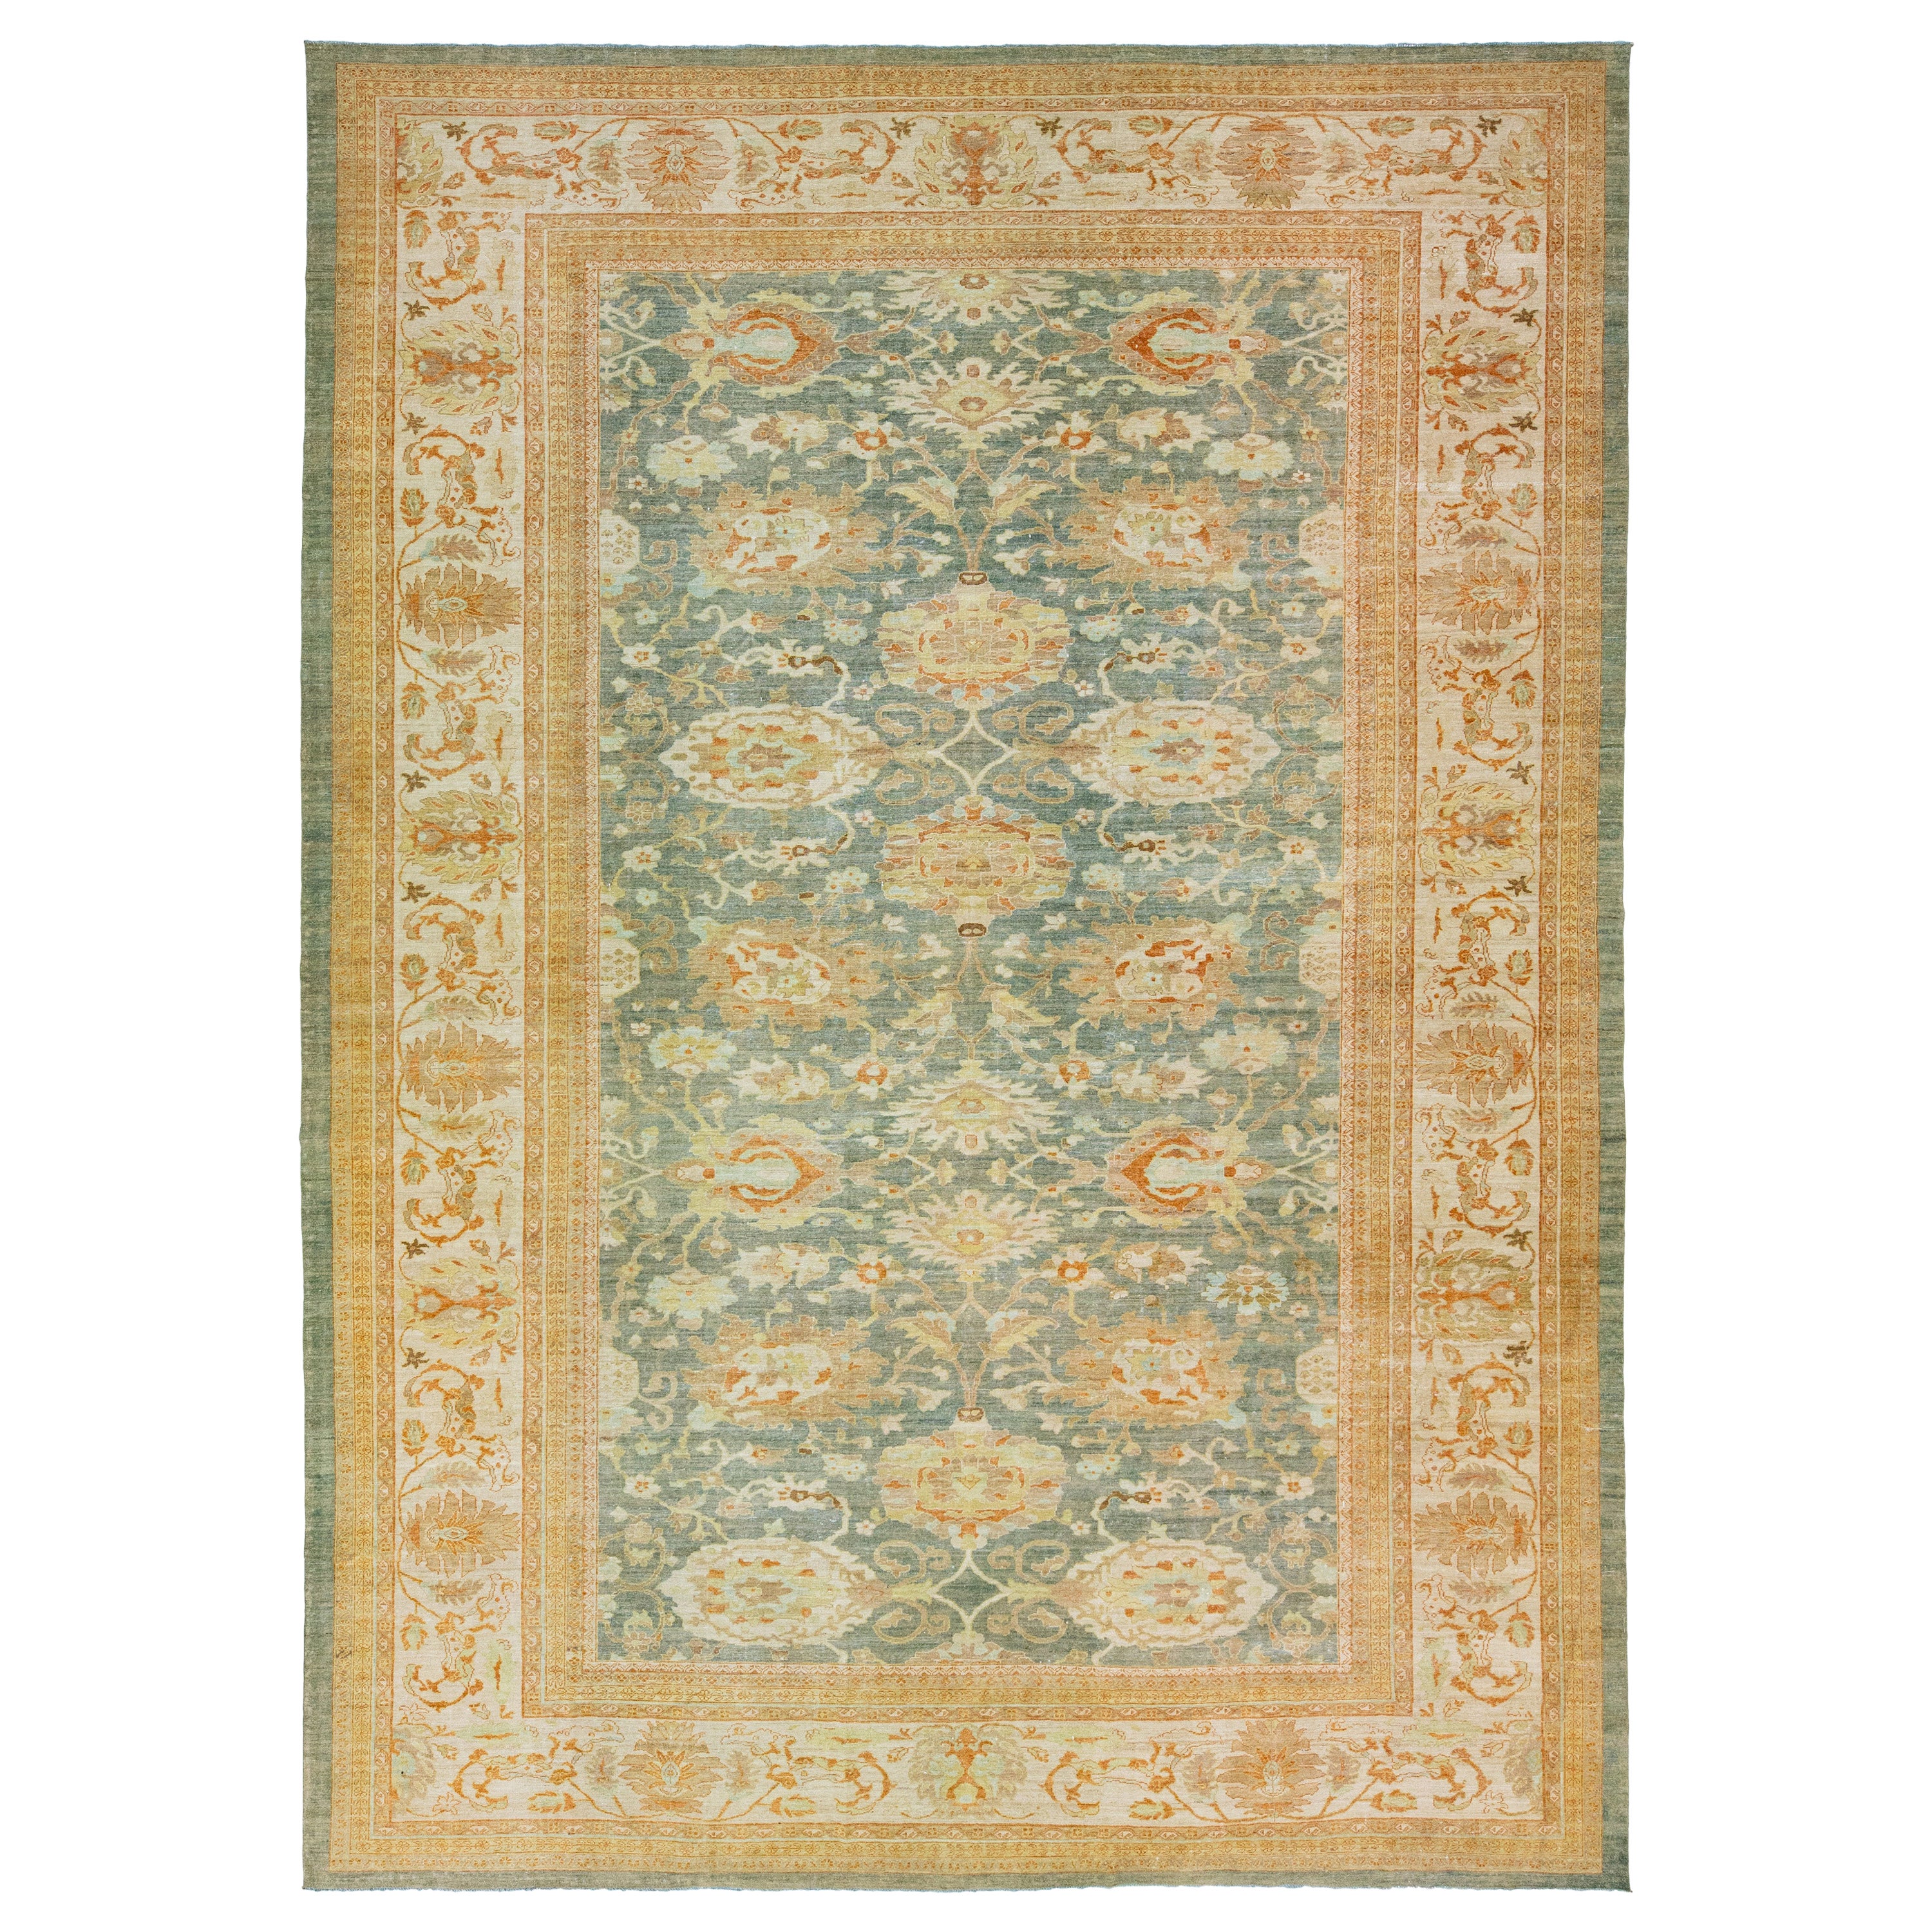 Light Blue Persian Wool Rug Vinatge  from the 1940's with a Floral Design For Sale